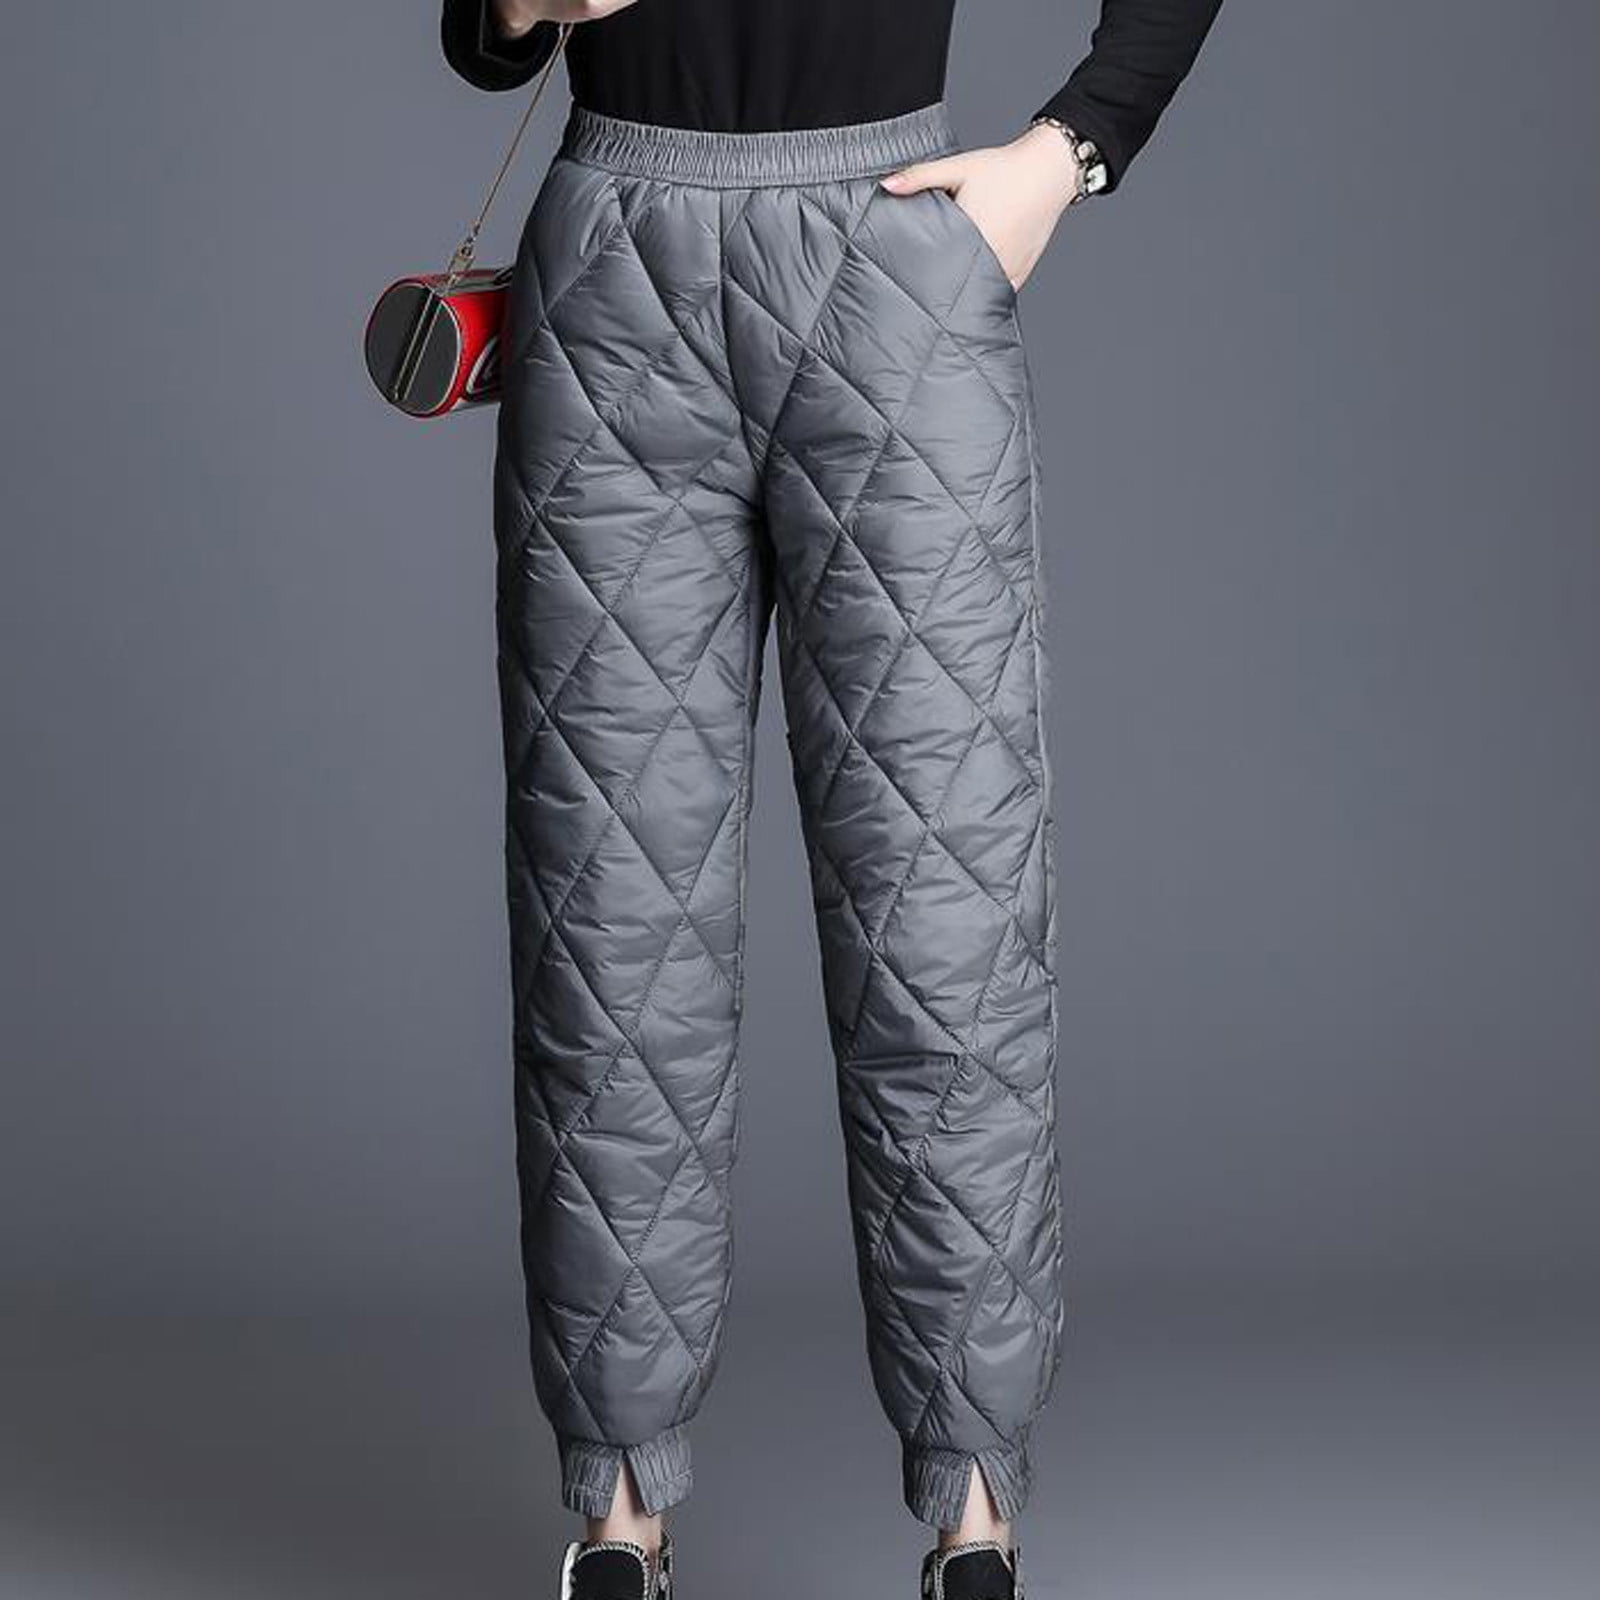 Cold Climate Pants - insulated clothing for winter weather, 2023 - 2024